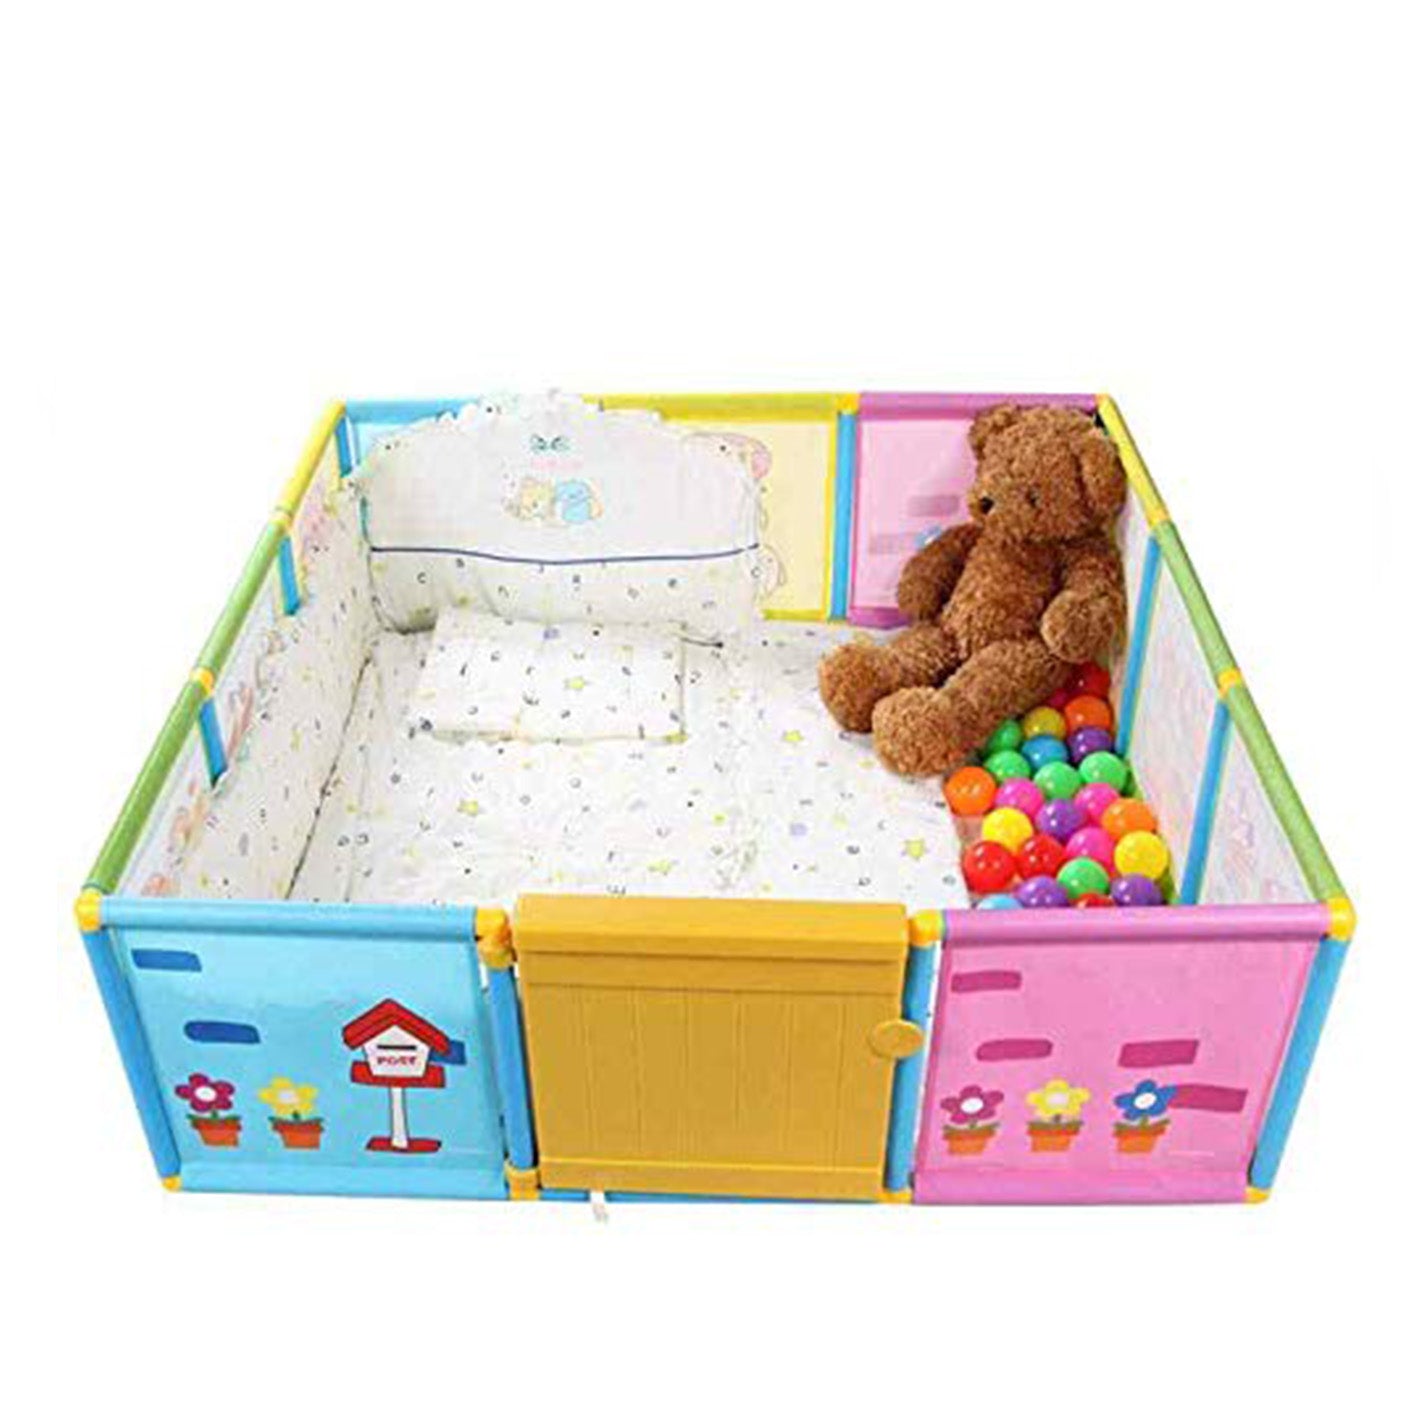 Creative Play House for Kids Play Pen Activity - Multicolour - Baby Moo